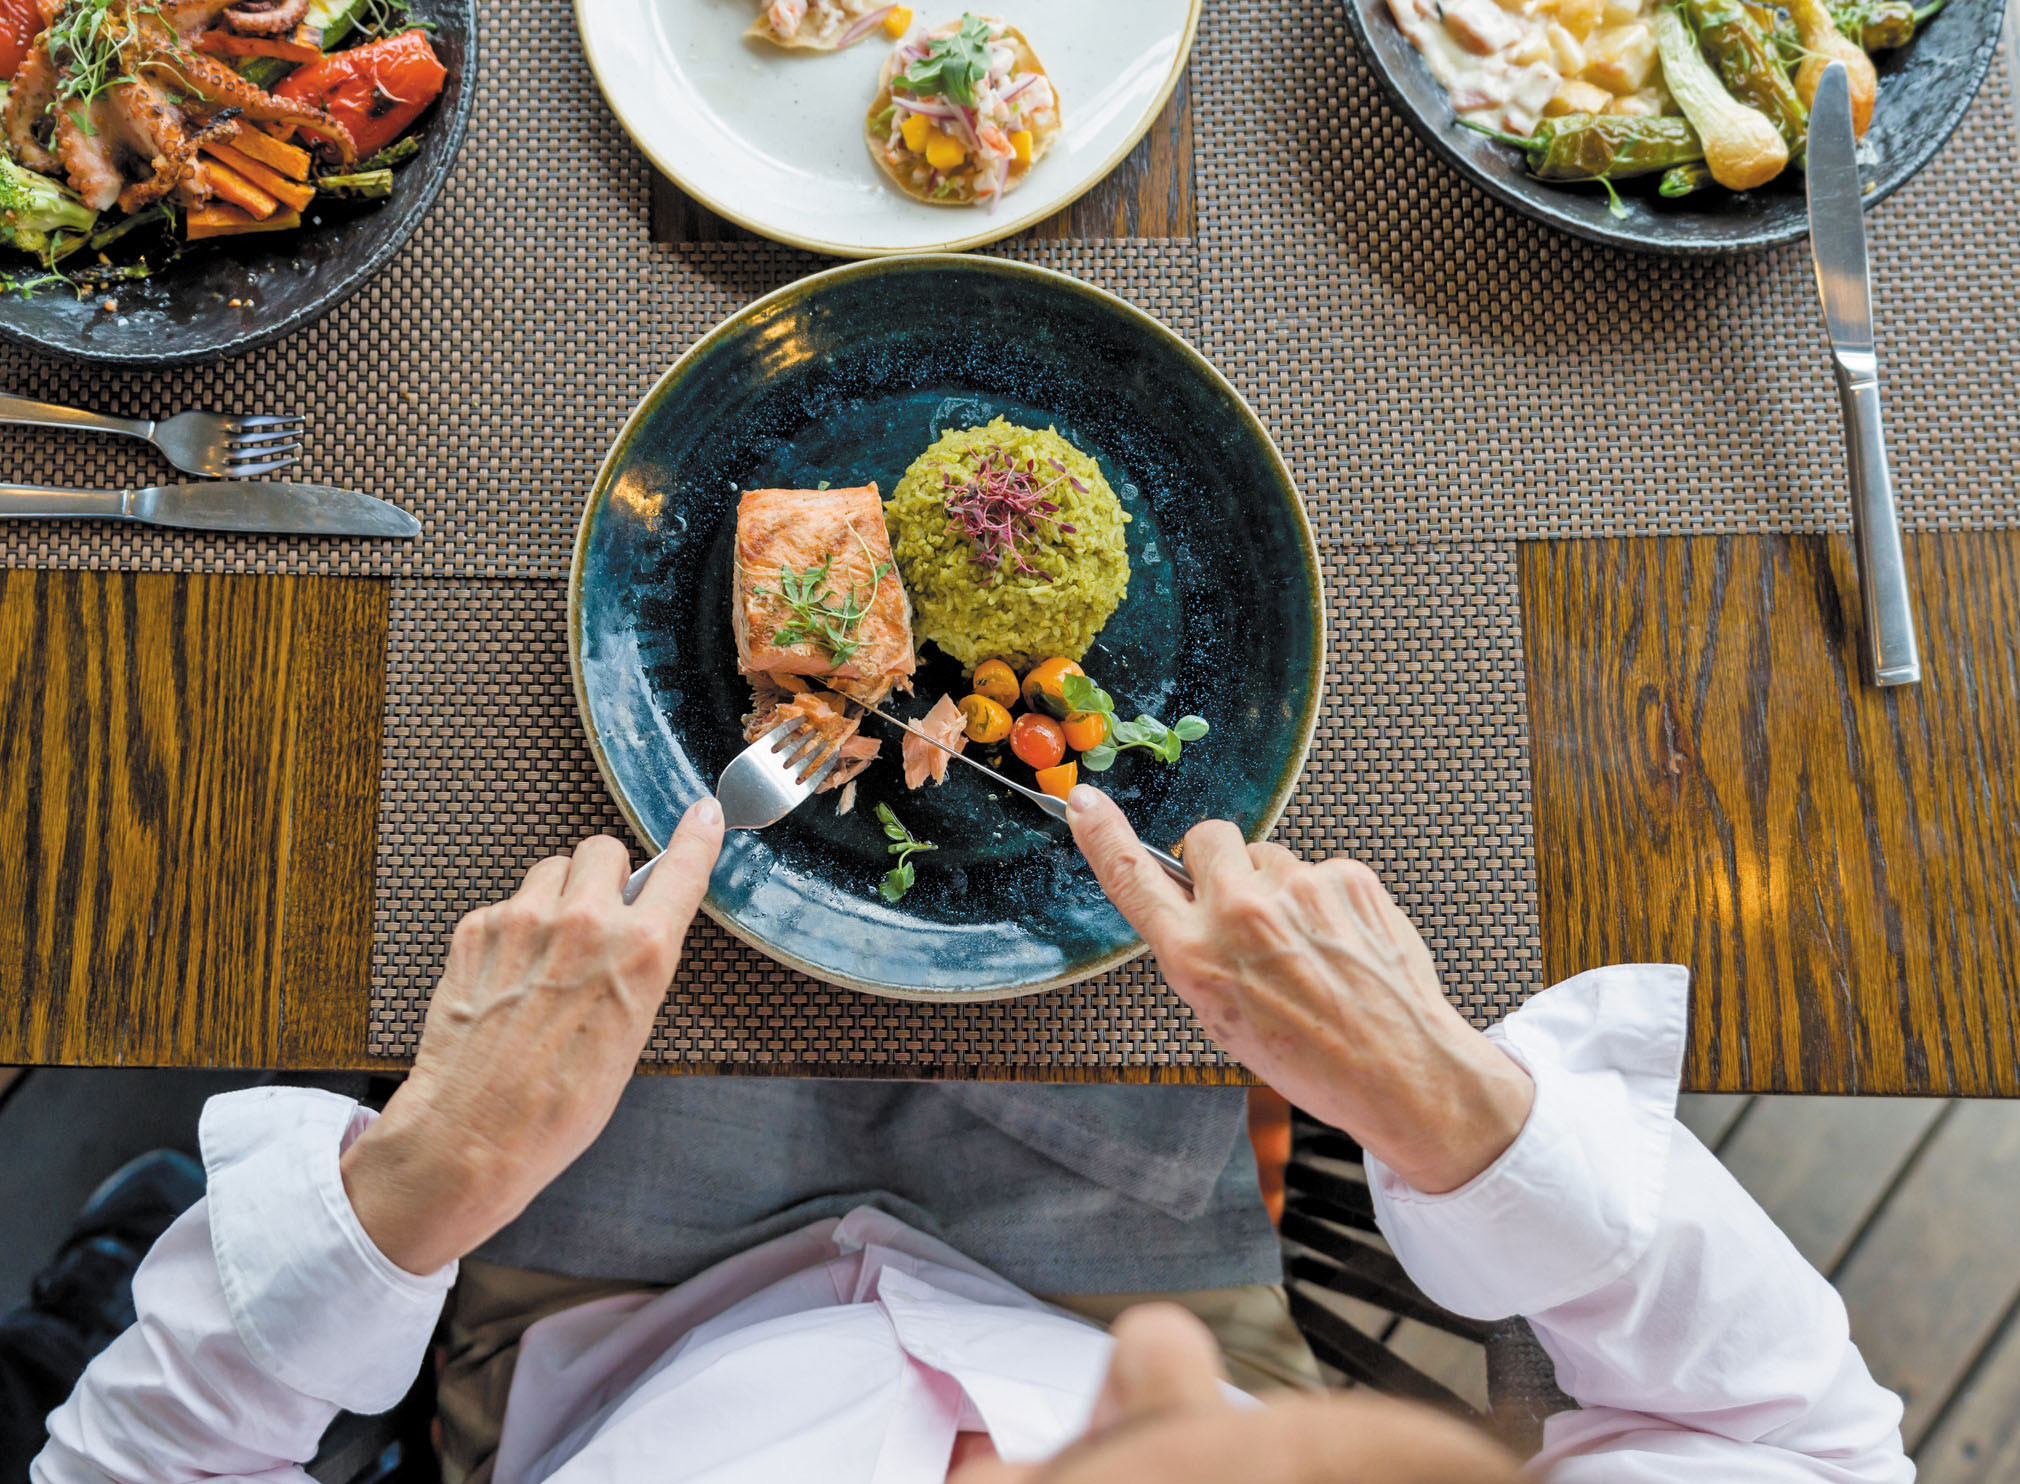 cropped photo overhead view of a person's hands using a fork and knife to cut a piece of salmon; vegetables and couscous are also on the plate